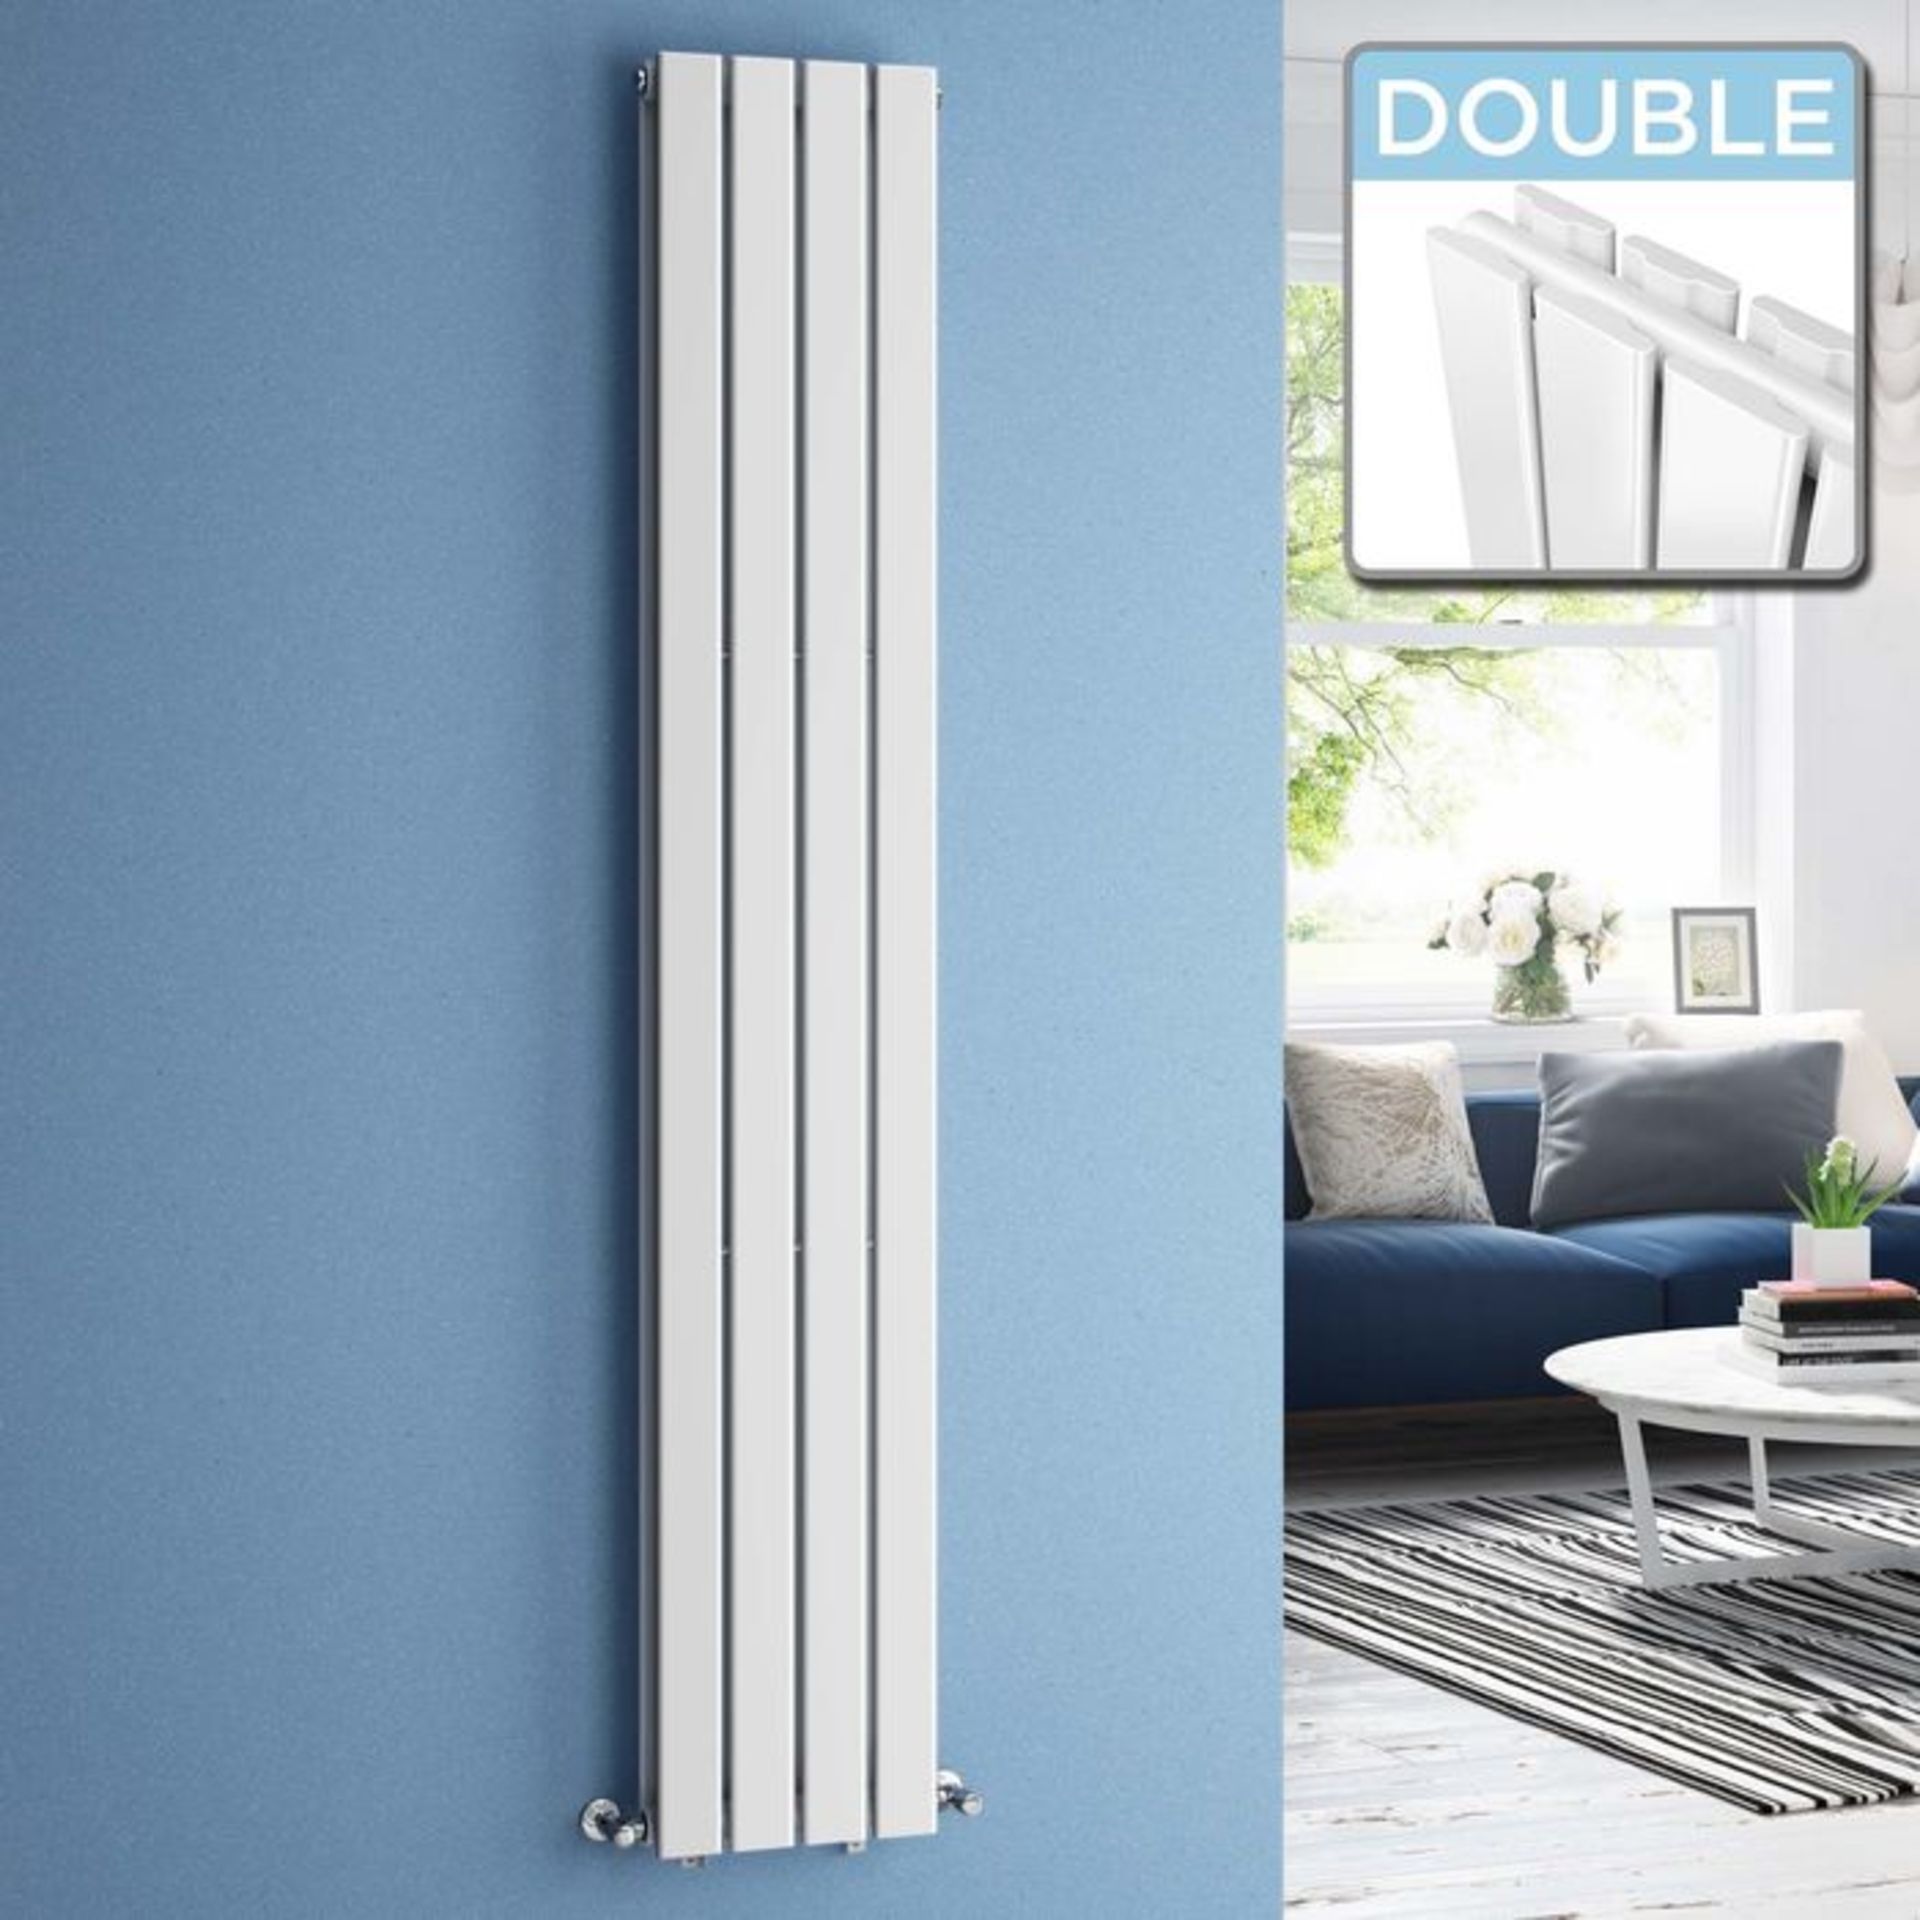 (DW191) 1600x300mm Gloss White Double Flat Panel Vertical Radiator. RRP £299.99. We love this ... - Image 3 of 3